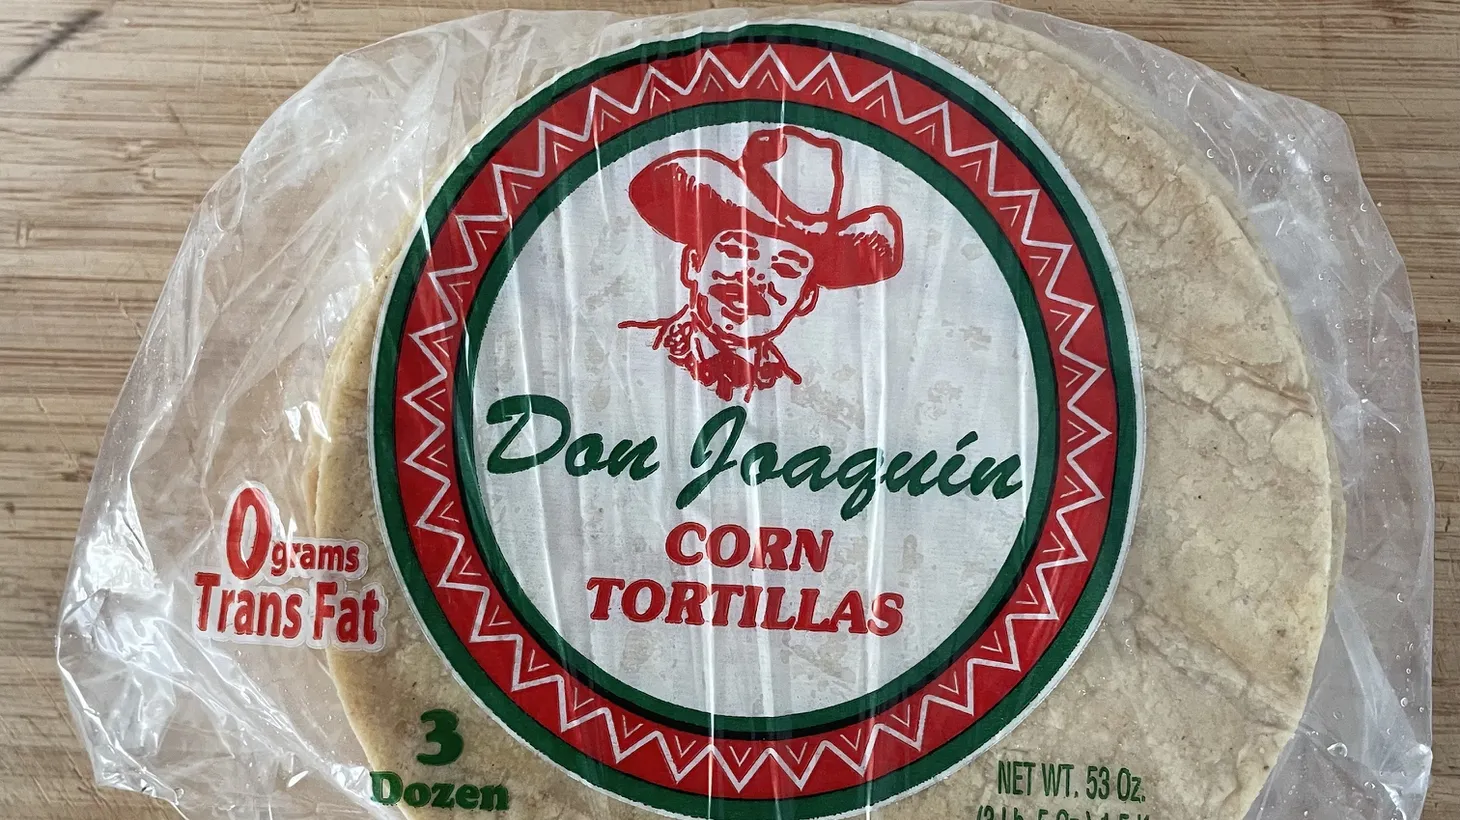 “The most effective designs in my mind are ones that, like the best tortillas, feel homemade: bearing imperfections, yet full of panache, with a well-rounded quality that evokes a certain tortilla-ness,” says Carolina A. Miranda. Don Joaquin Tortillas from Moreno Foods in San Jacinto.